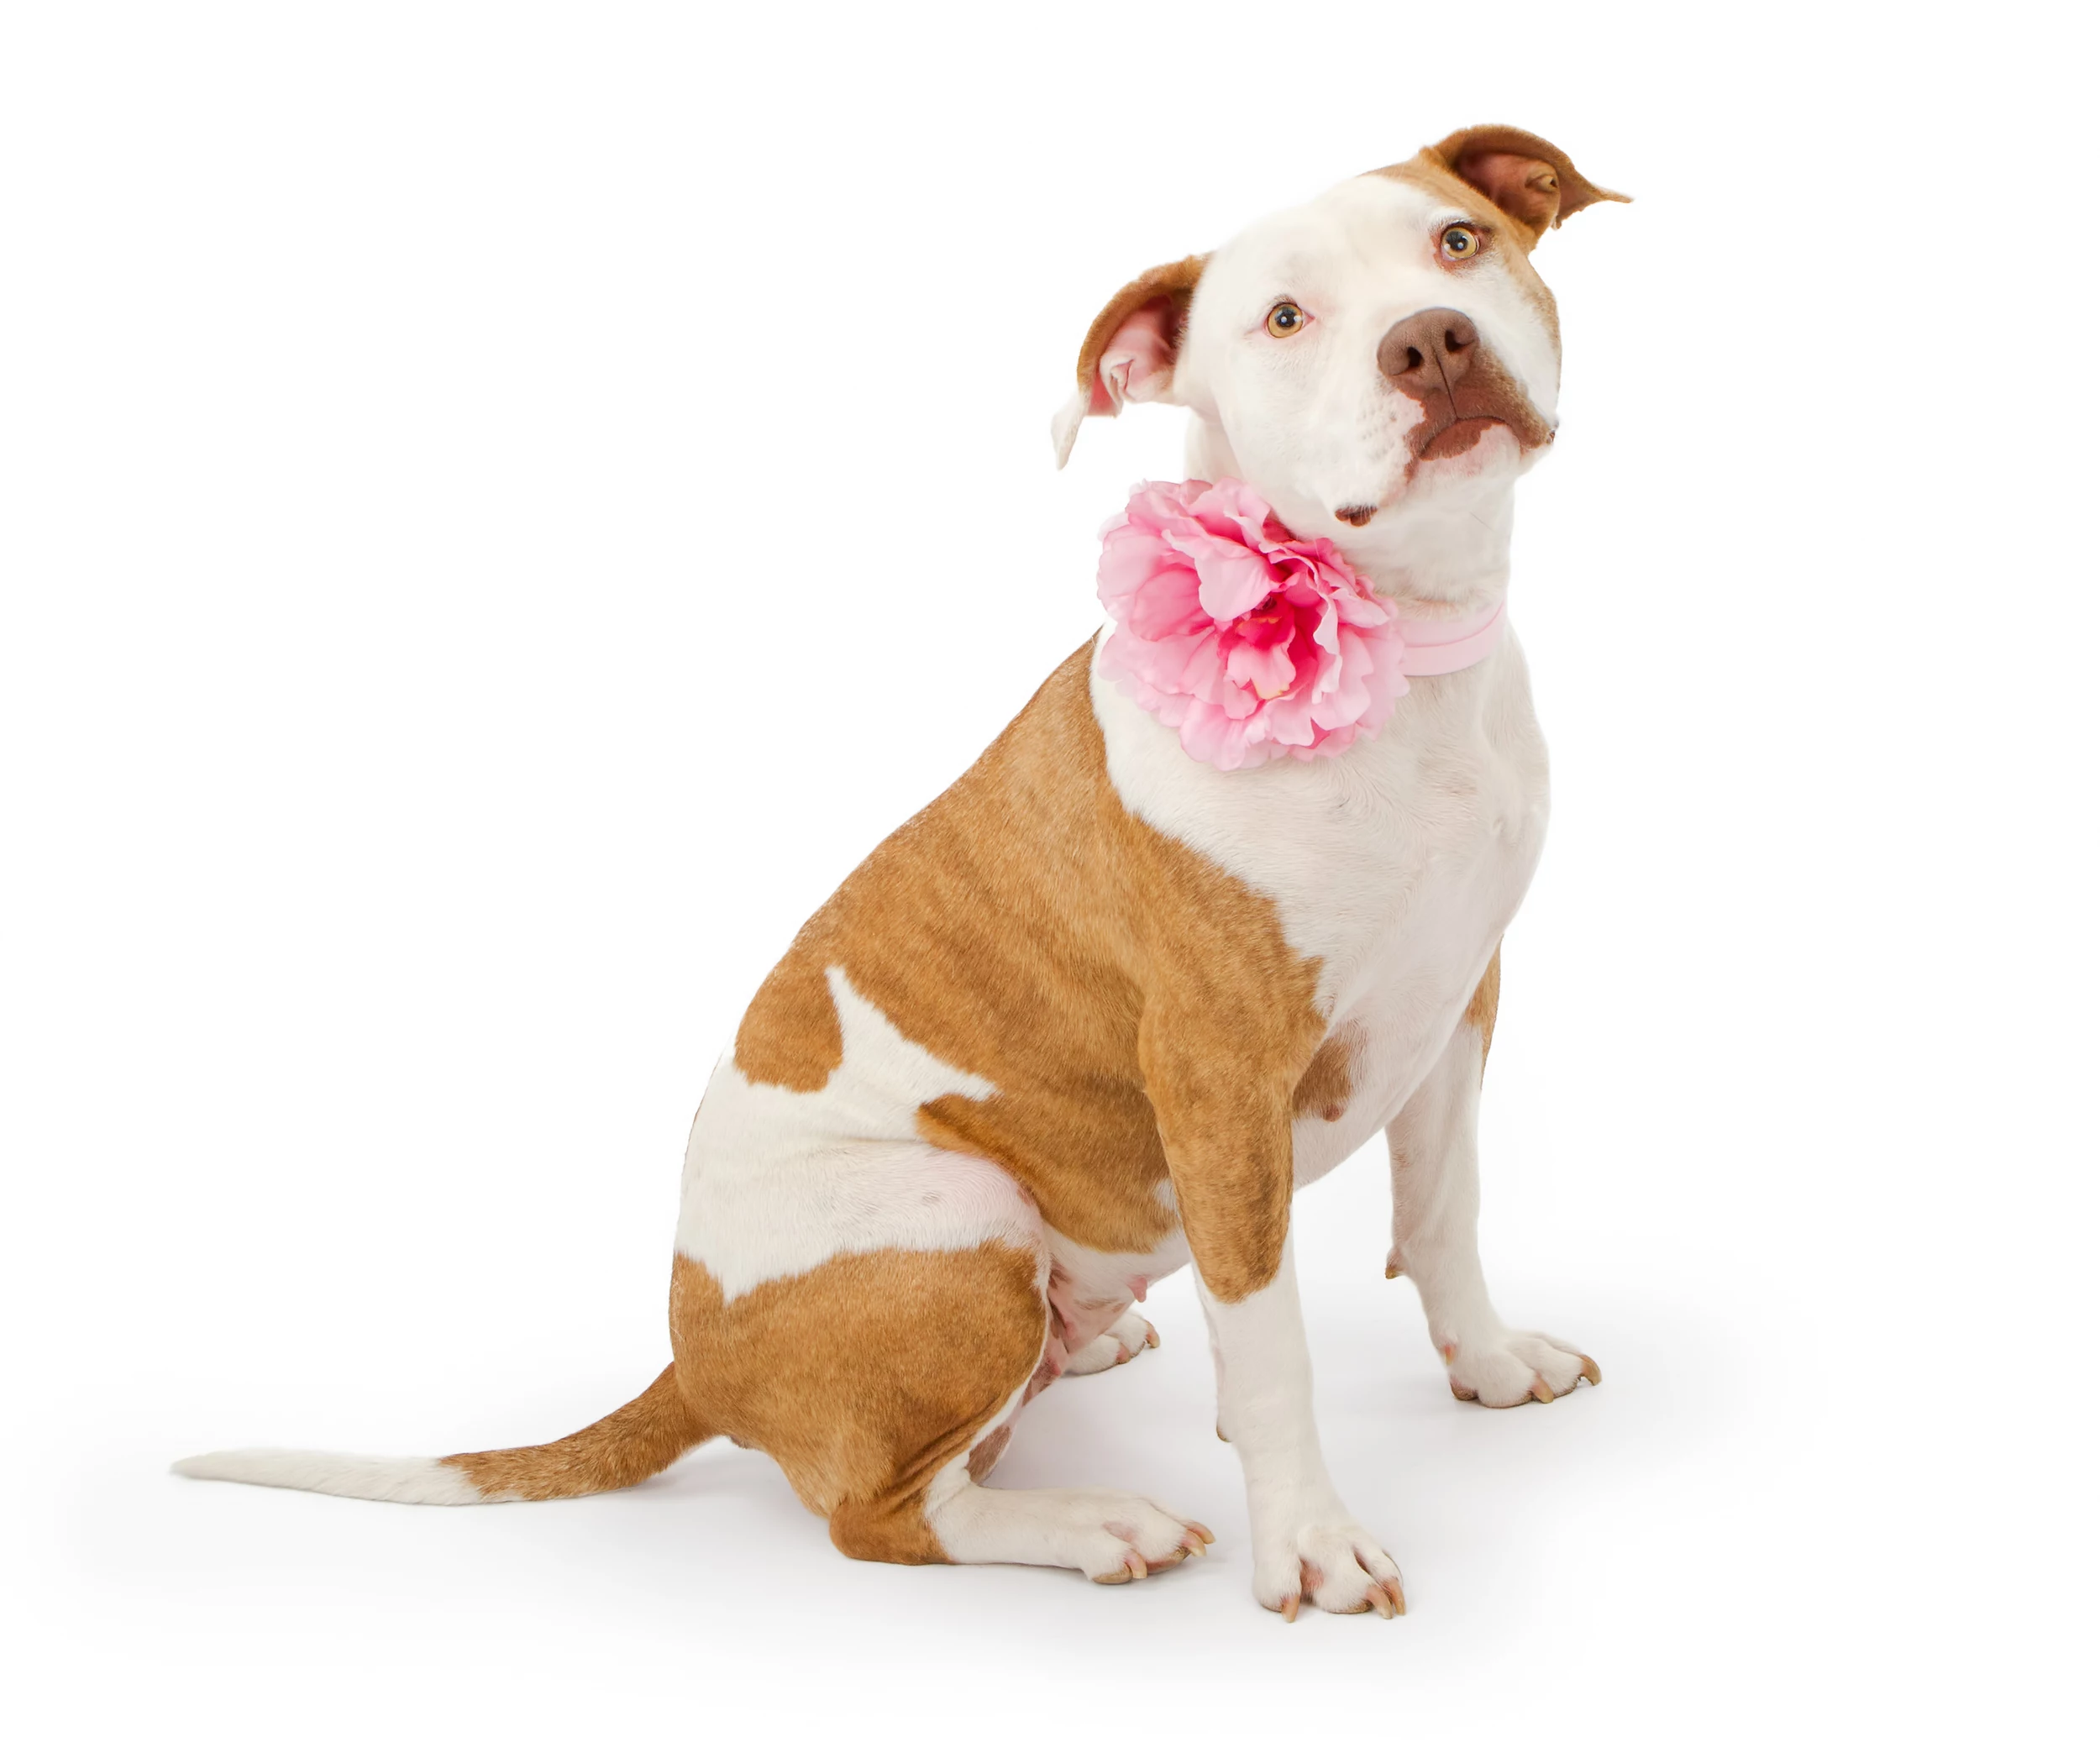 National Pit Bull Awareness Month: a 'misunderstood breed' – Muddy